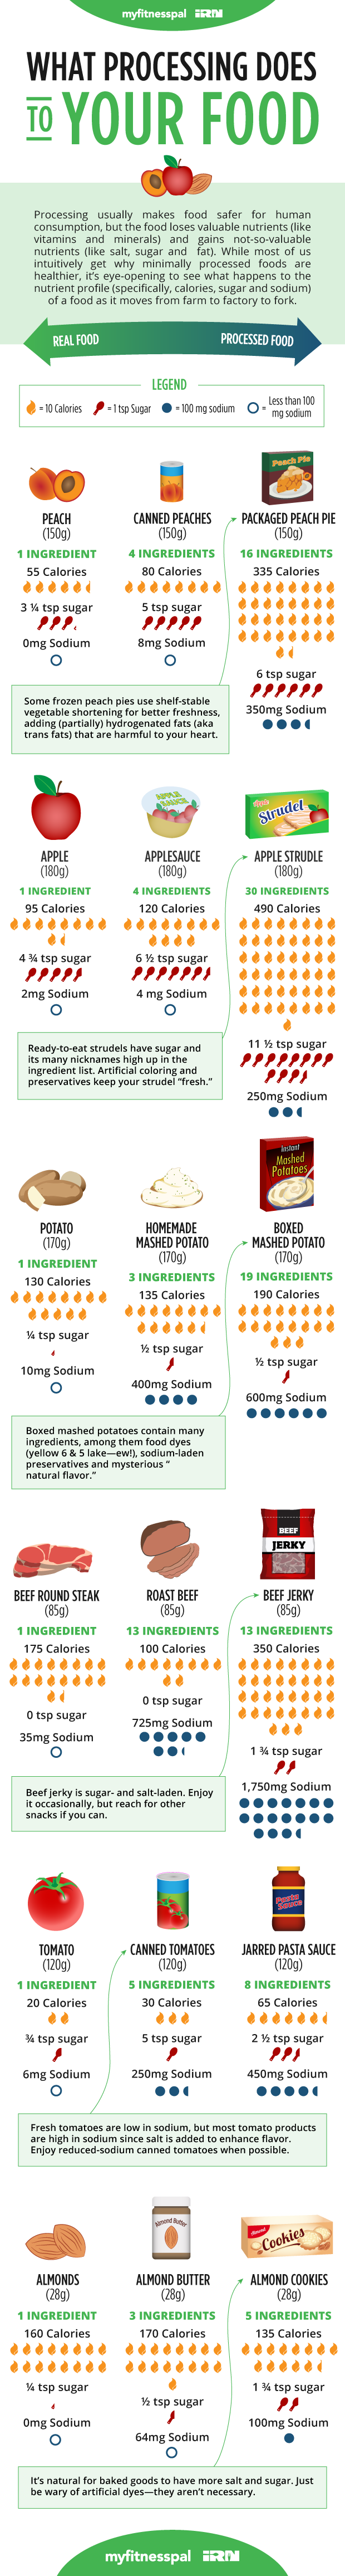 The Anatomy of Processed Food Infographic